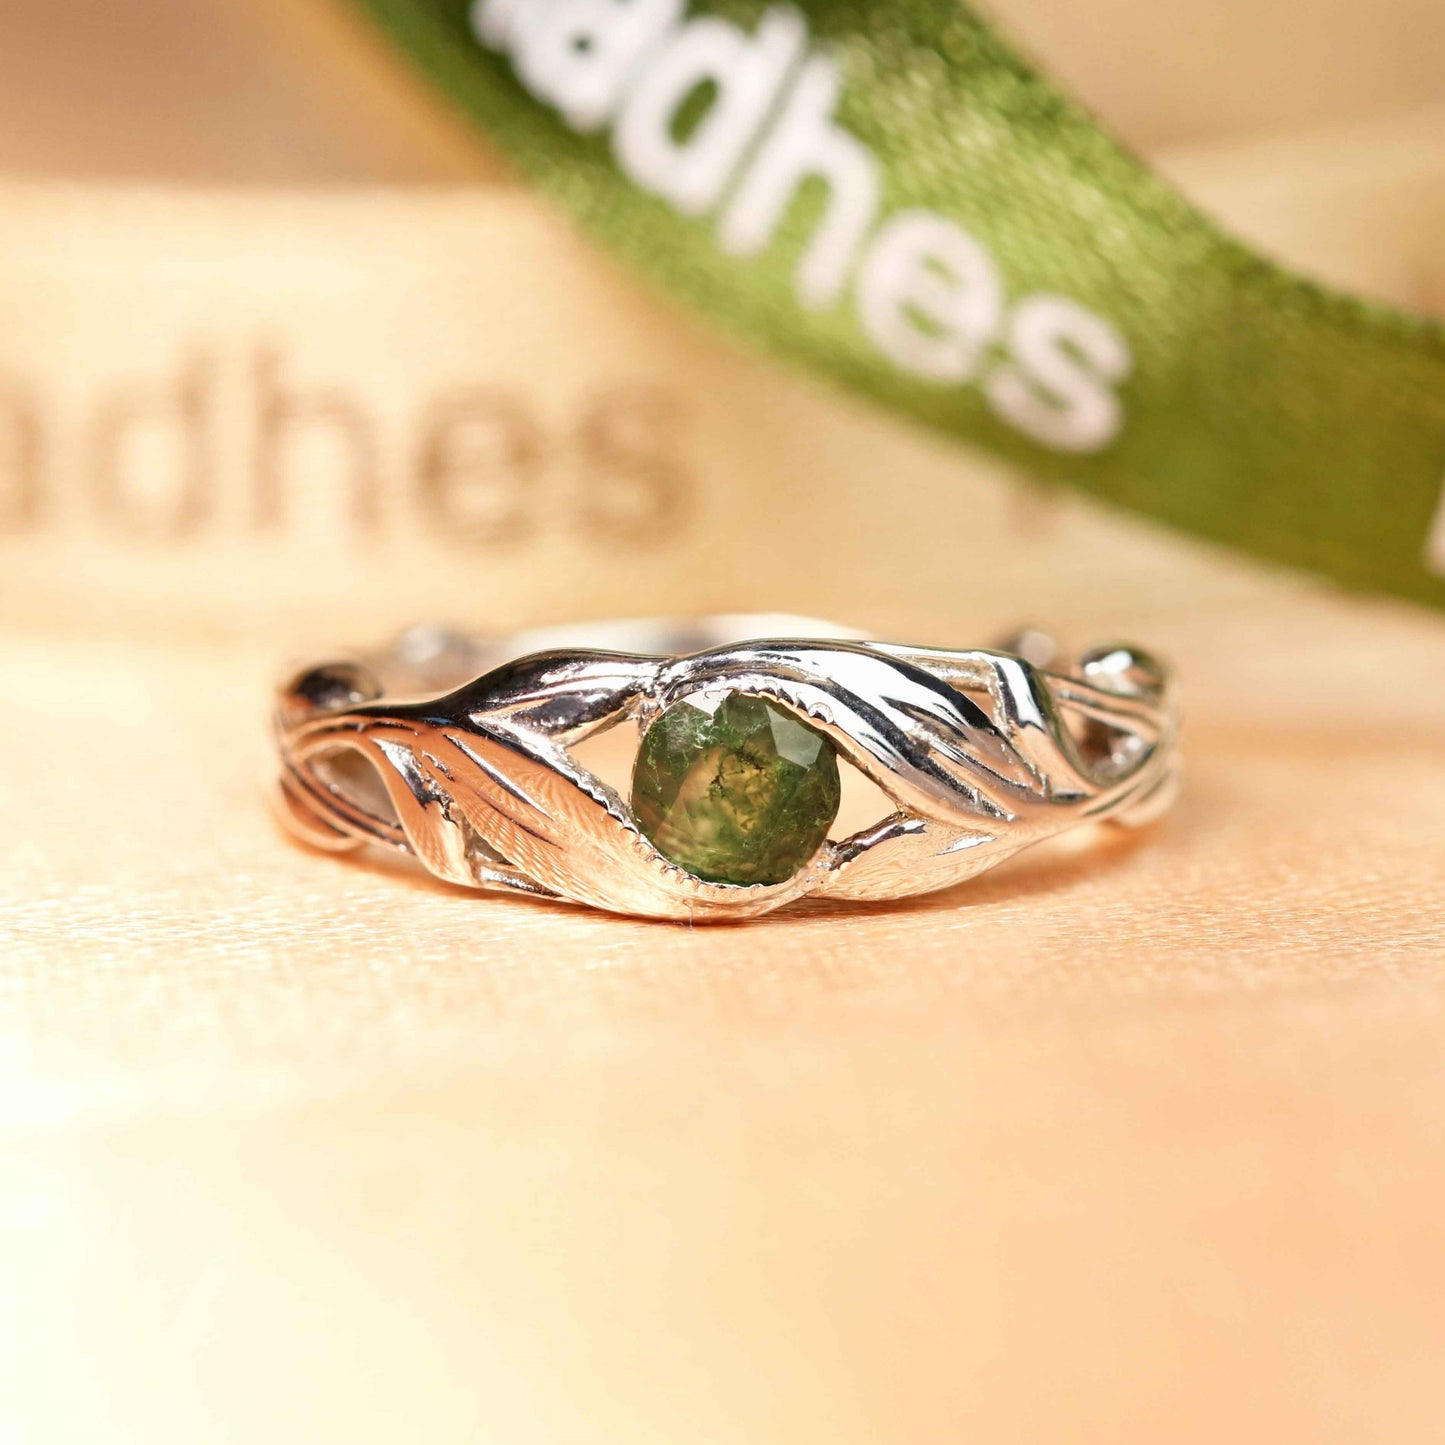 Nature-inspired 1 carat Round Cut Moss Green Agate Leafy Single Stone Engagement Ring in White Gold